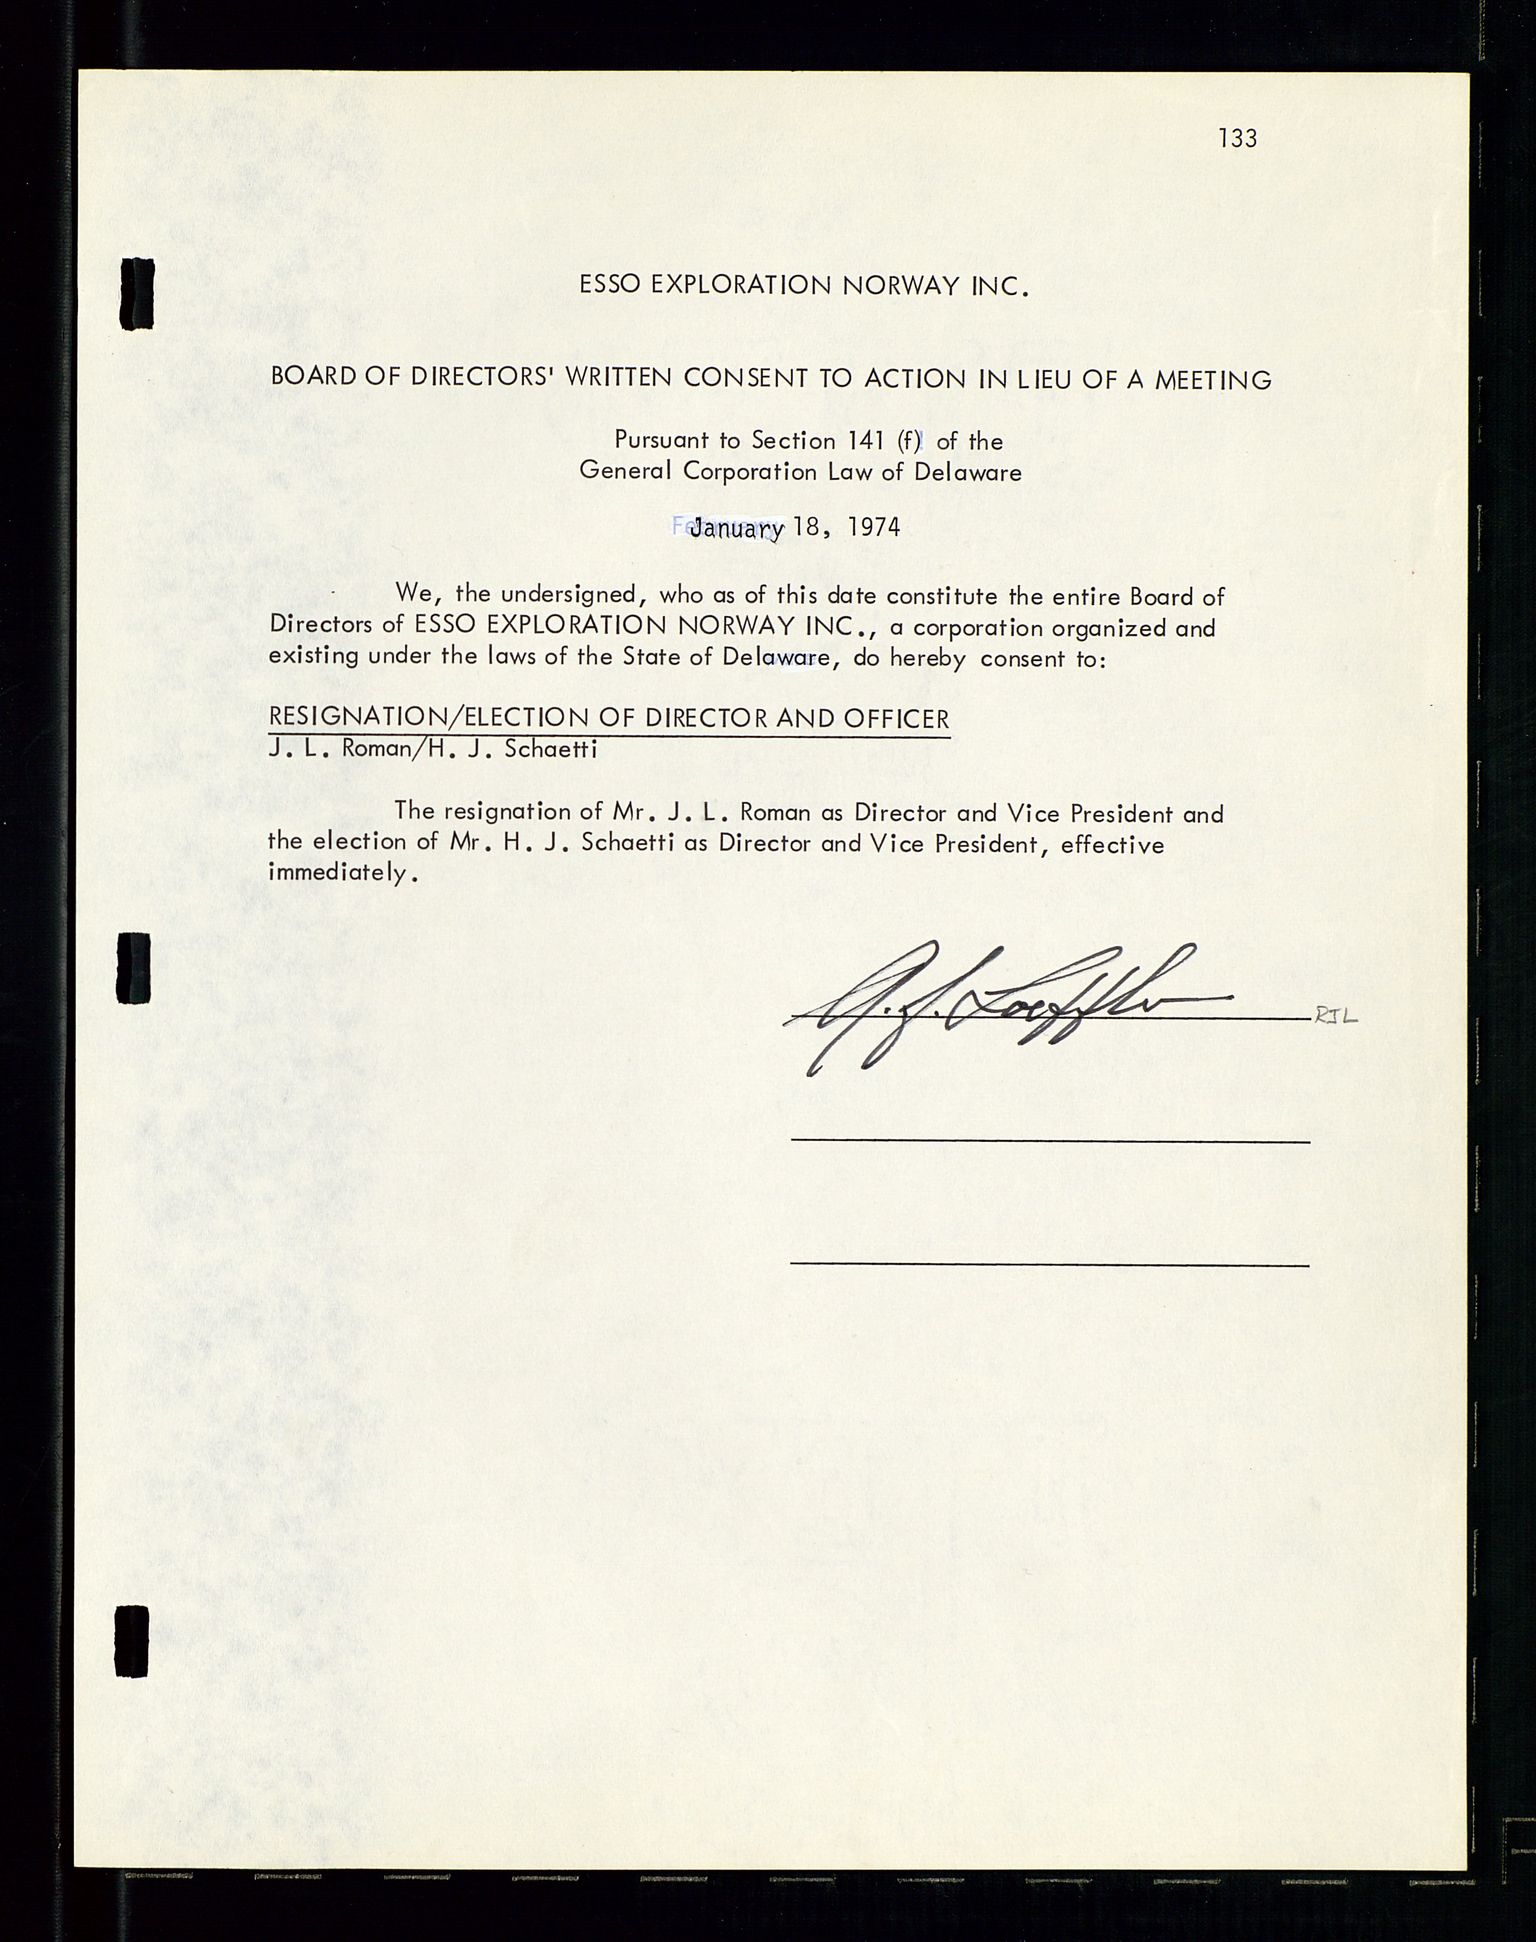 Pa 1512 - Esso Exploration and Production Norway Inc., SAST/A-101917/A/Aa/L0001/0001: Styredokumenter / Corporate records, By-Laws, Board meeting minutes, Incorporations, 1965-1975, s. 133